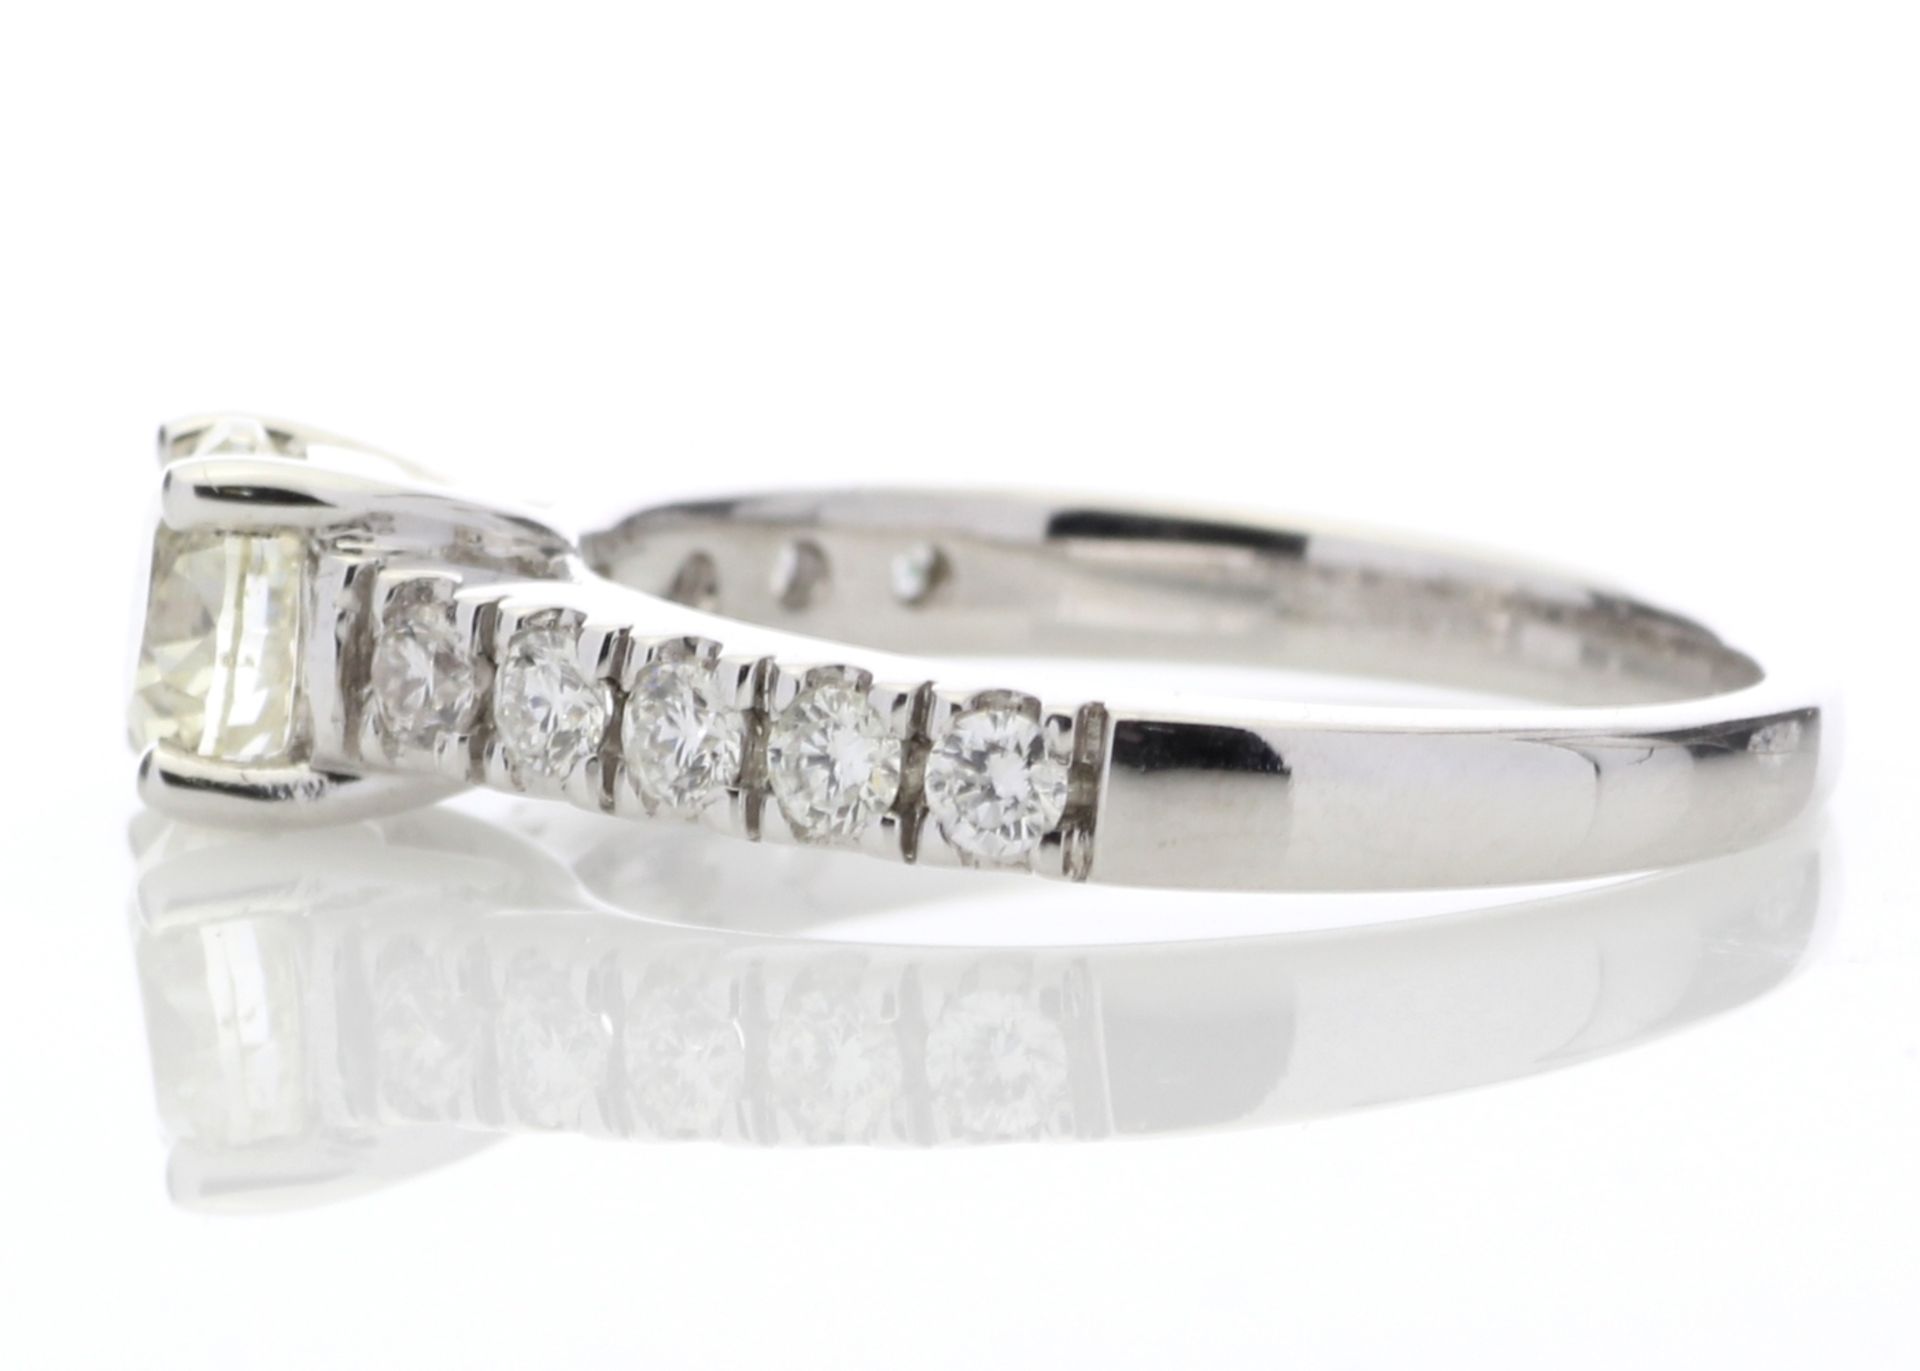 18ct White Gold Single Stone Claw Set With Stone Set Shoulders Diamond Ring 0.61 Carats - Image 3 of 5